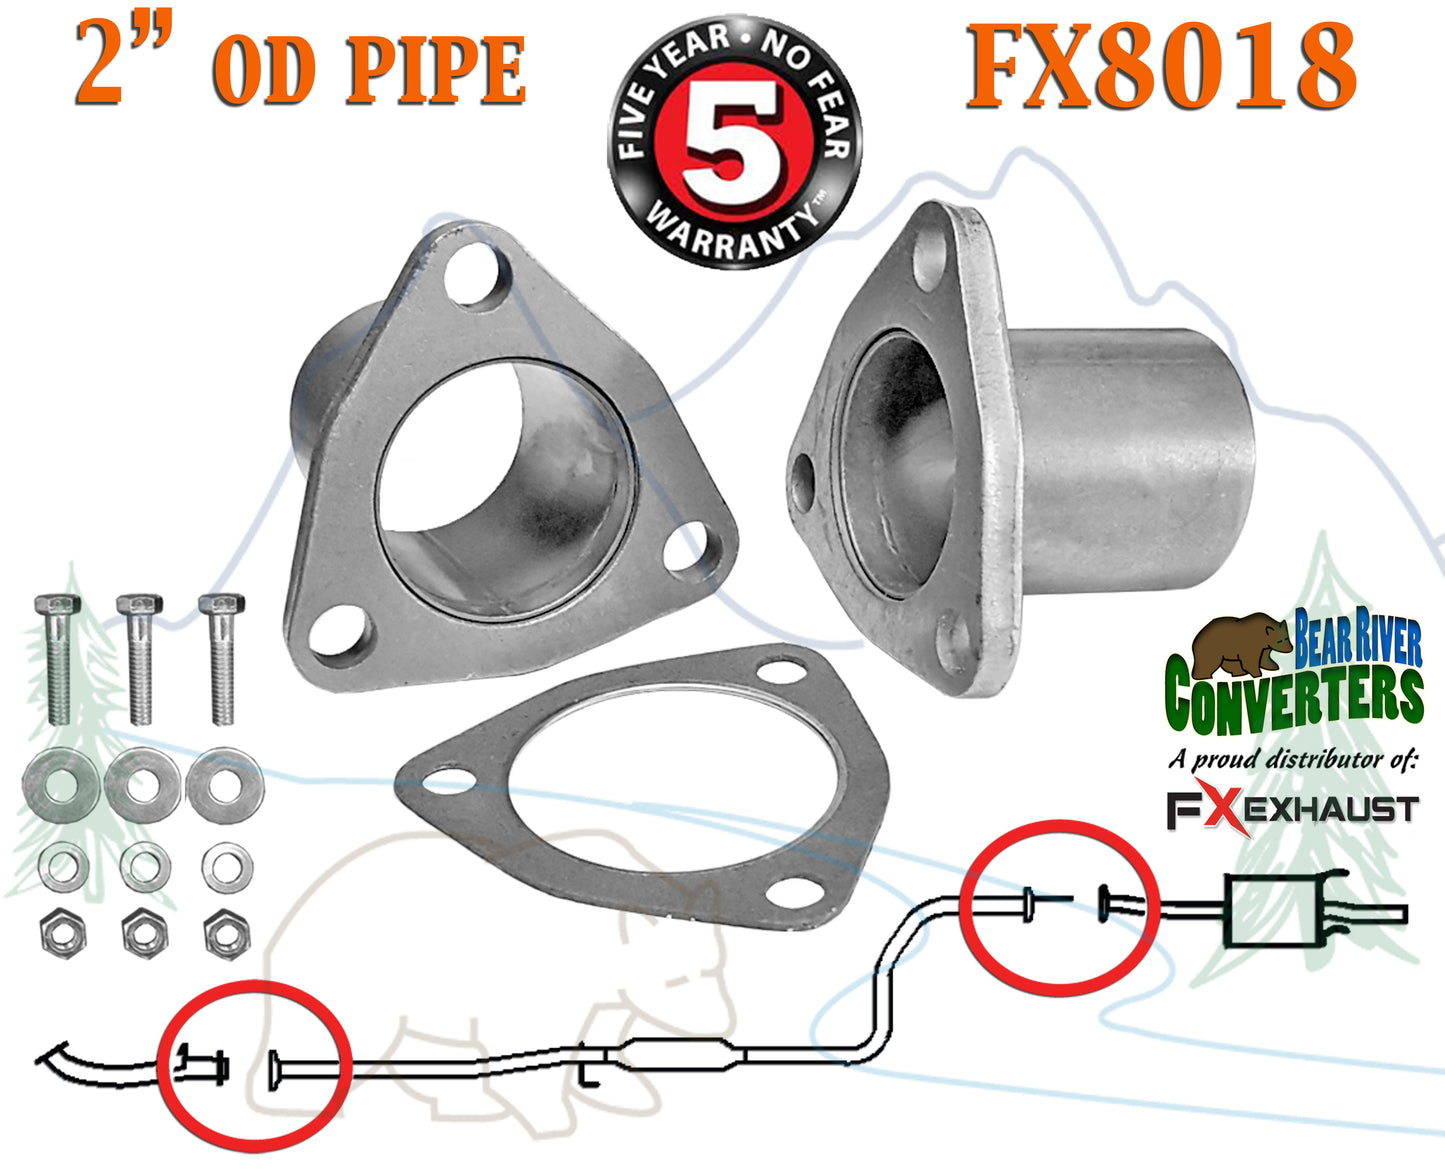 FX8018 2" OD Universal QuickFix Exhaust Triangle Flange Repair Pipe Kit